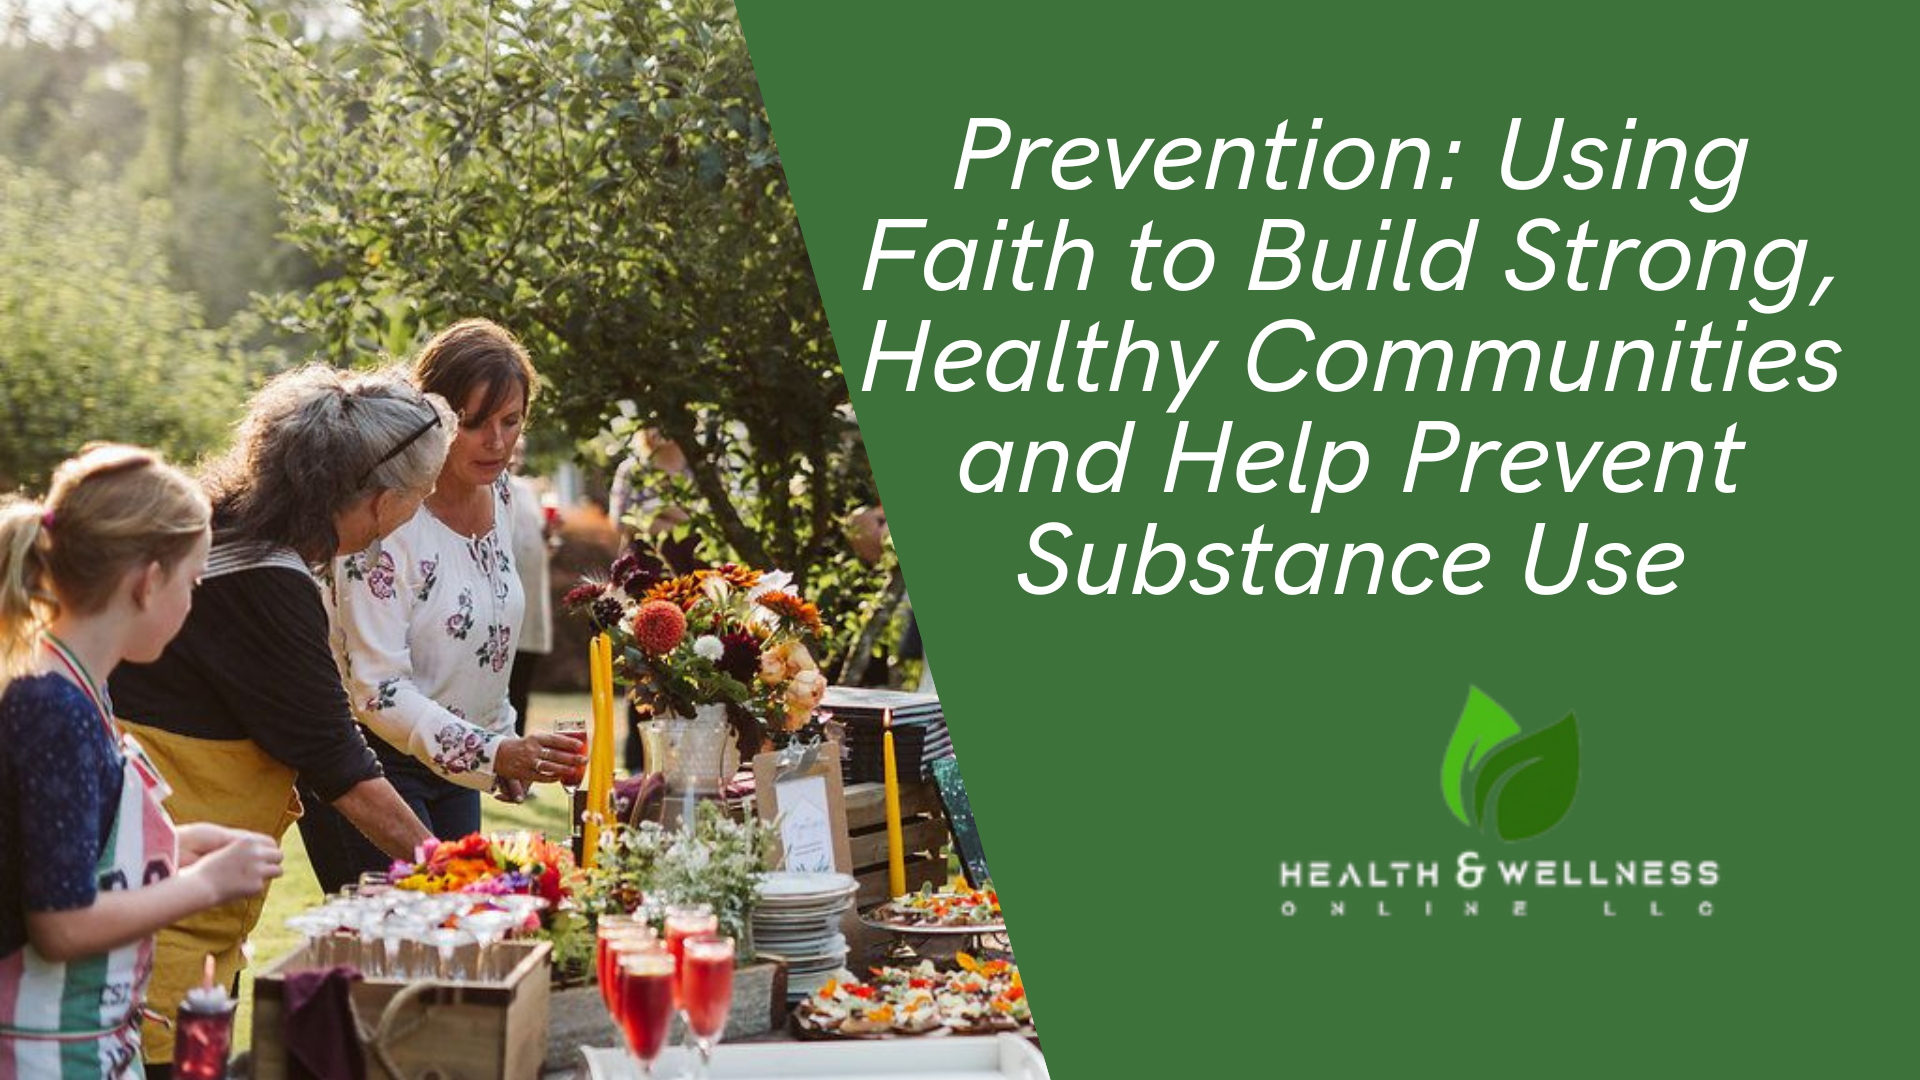 Prevention: using Faith to Build Strong, Healthy Communities and Help Prevent Substance Use is a 6.5 CE Credit Hours course by Dr. Donna Poppendieck from Health and Wellness Online.